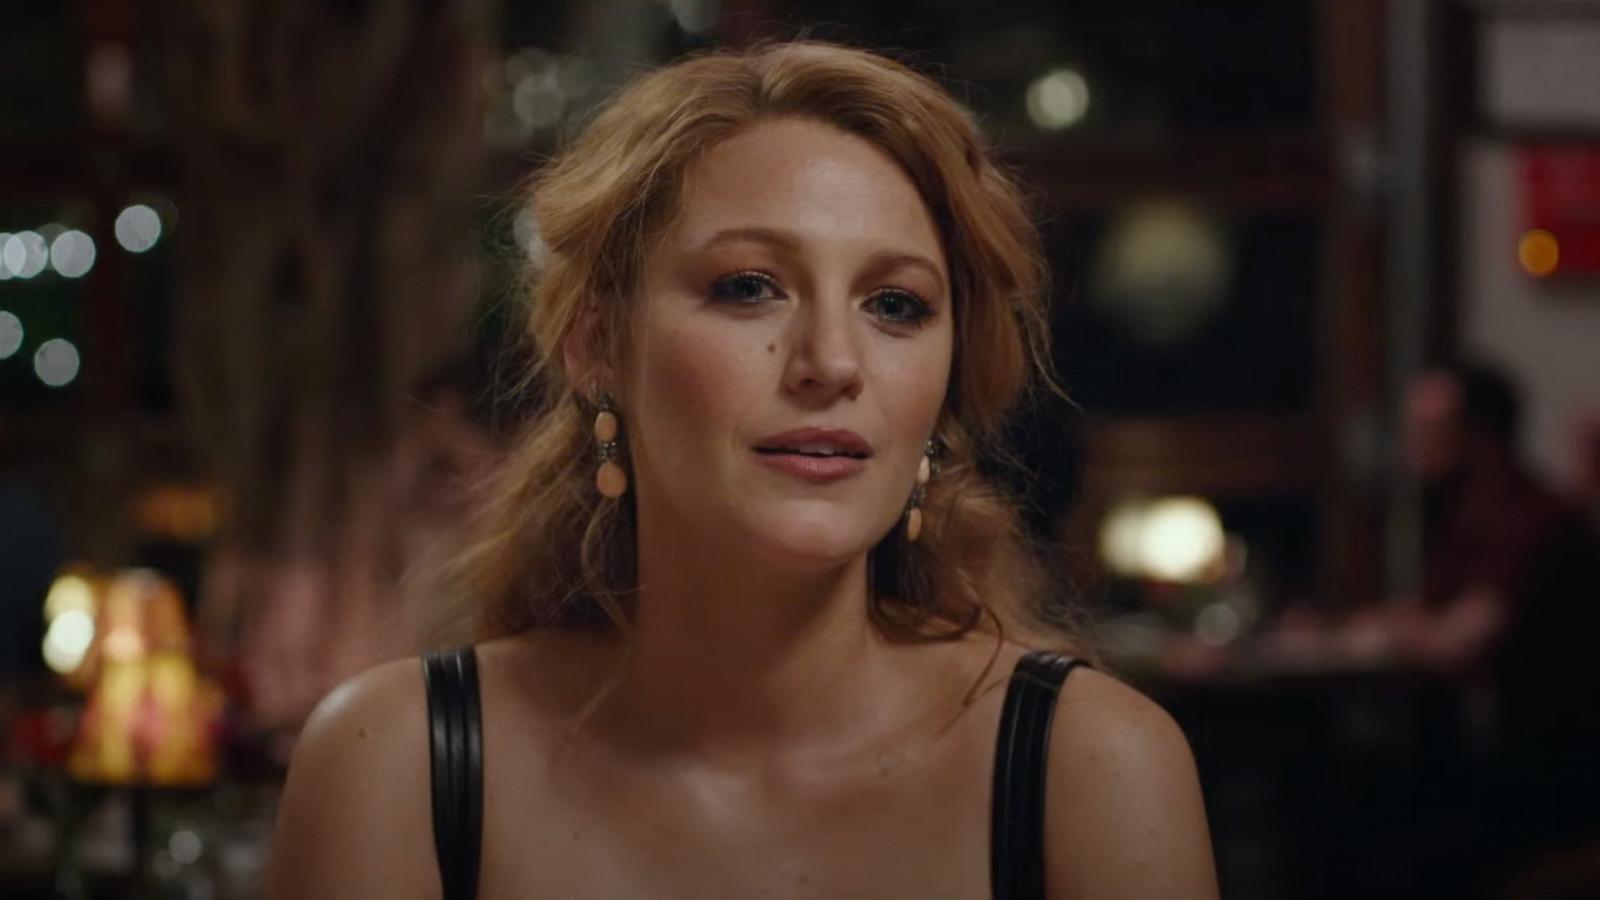 PHOTO: Blake Lively appears in a scene from the trailer for the film "It Ends with Us."